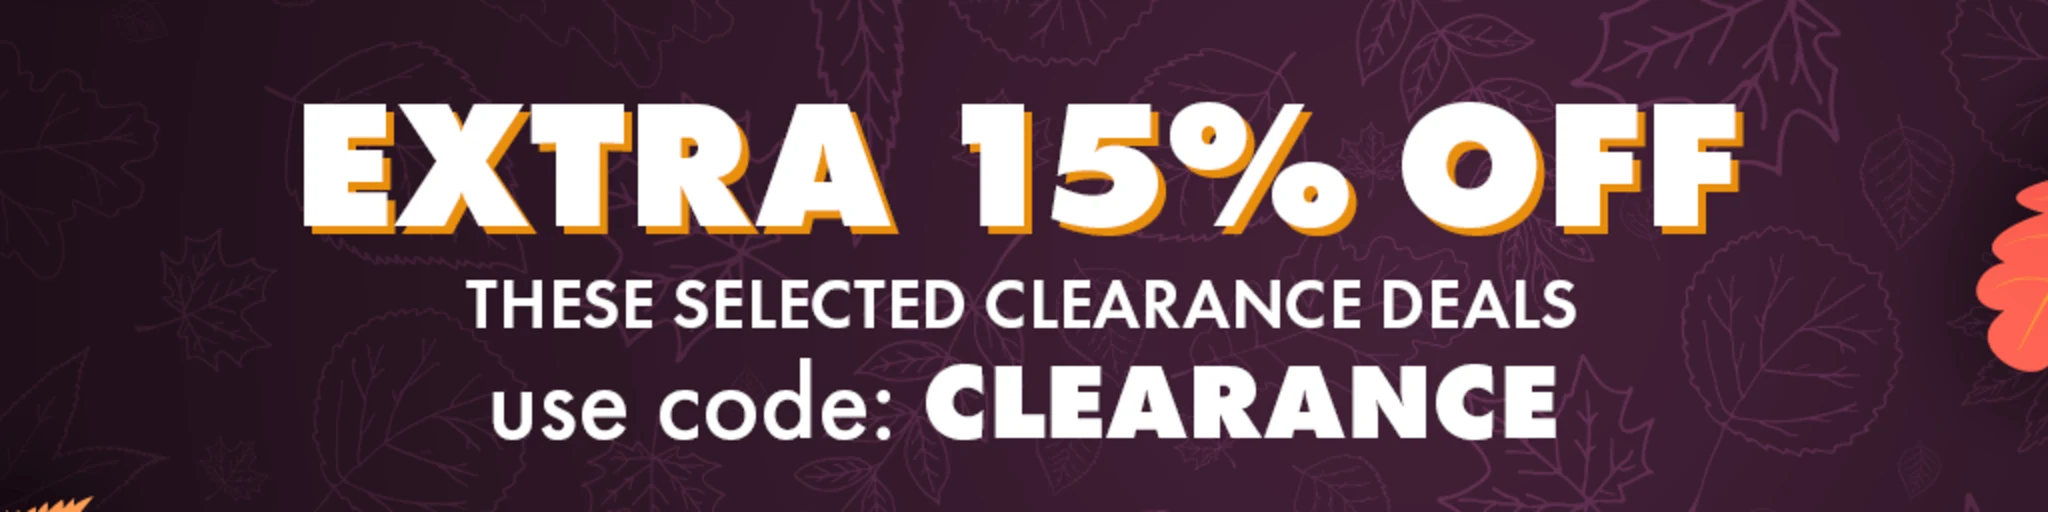 MorningSave: Extra 15% Off Clearance Deals